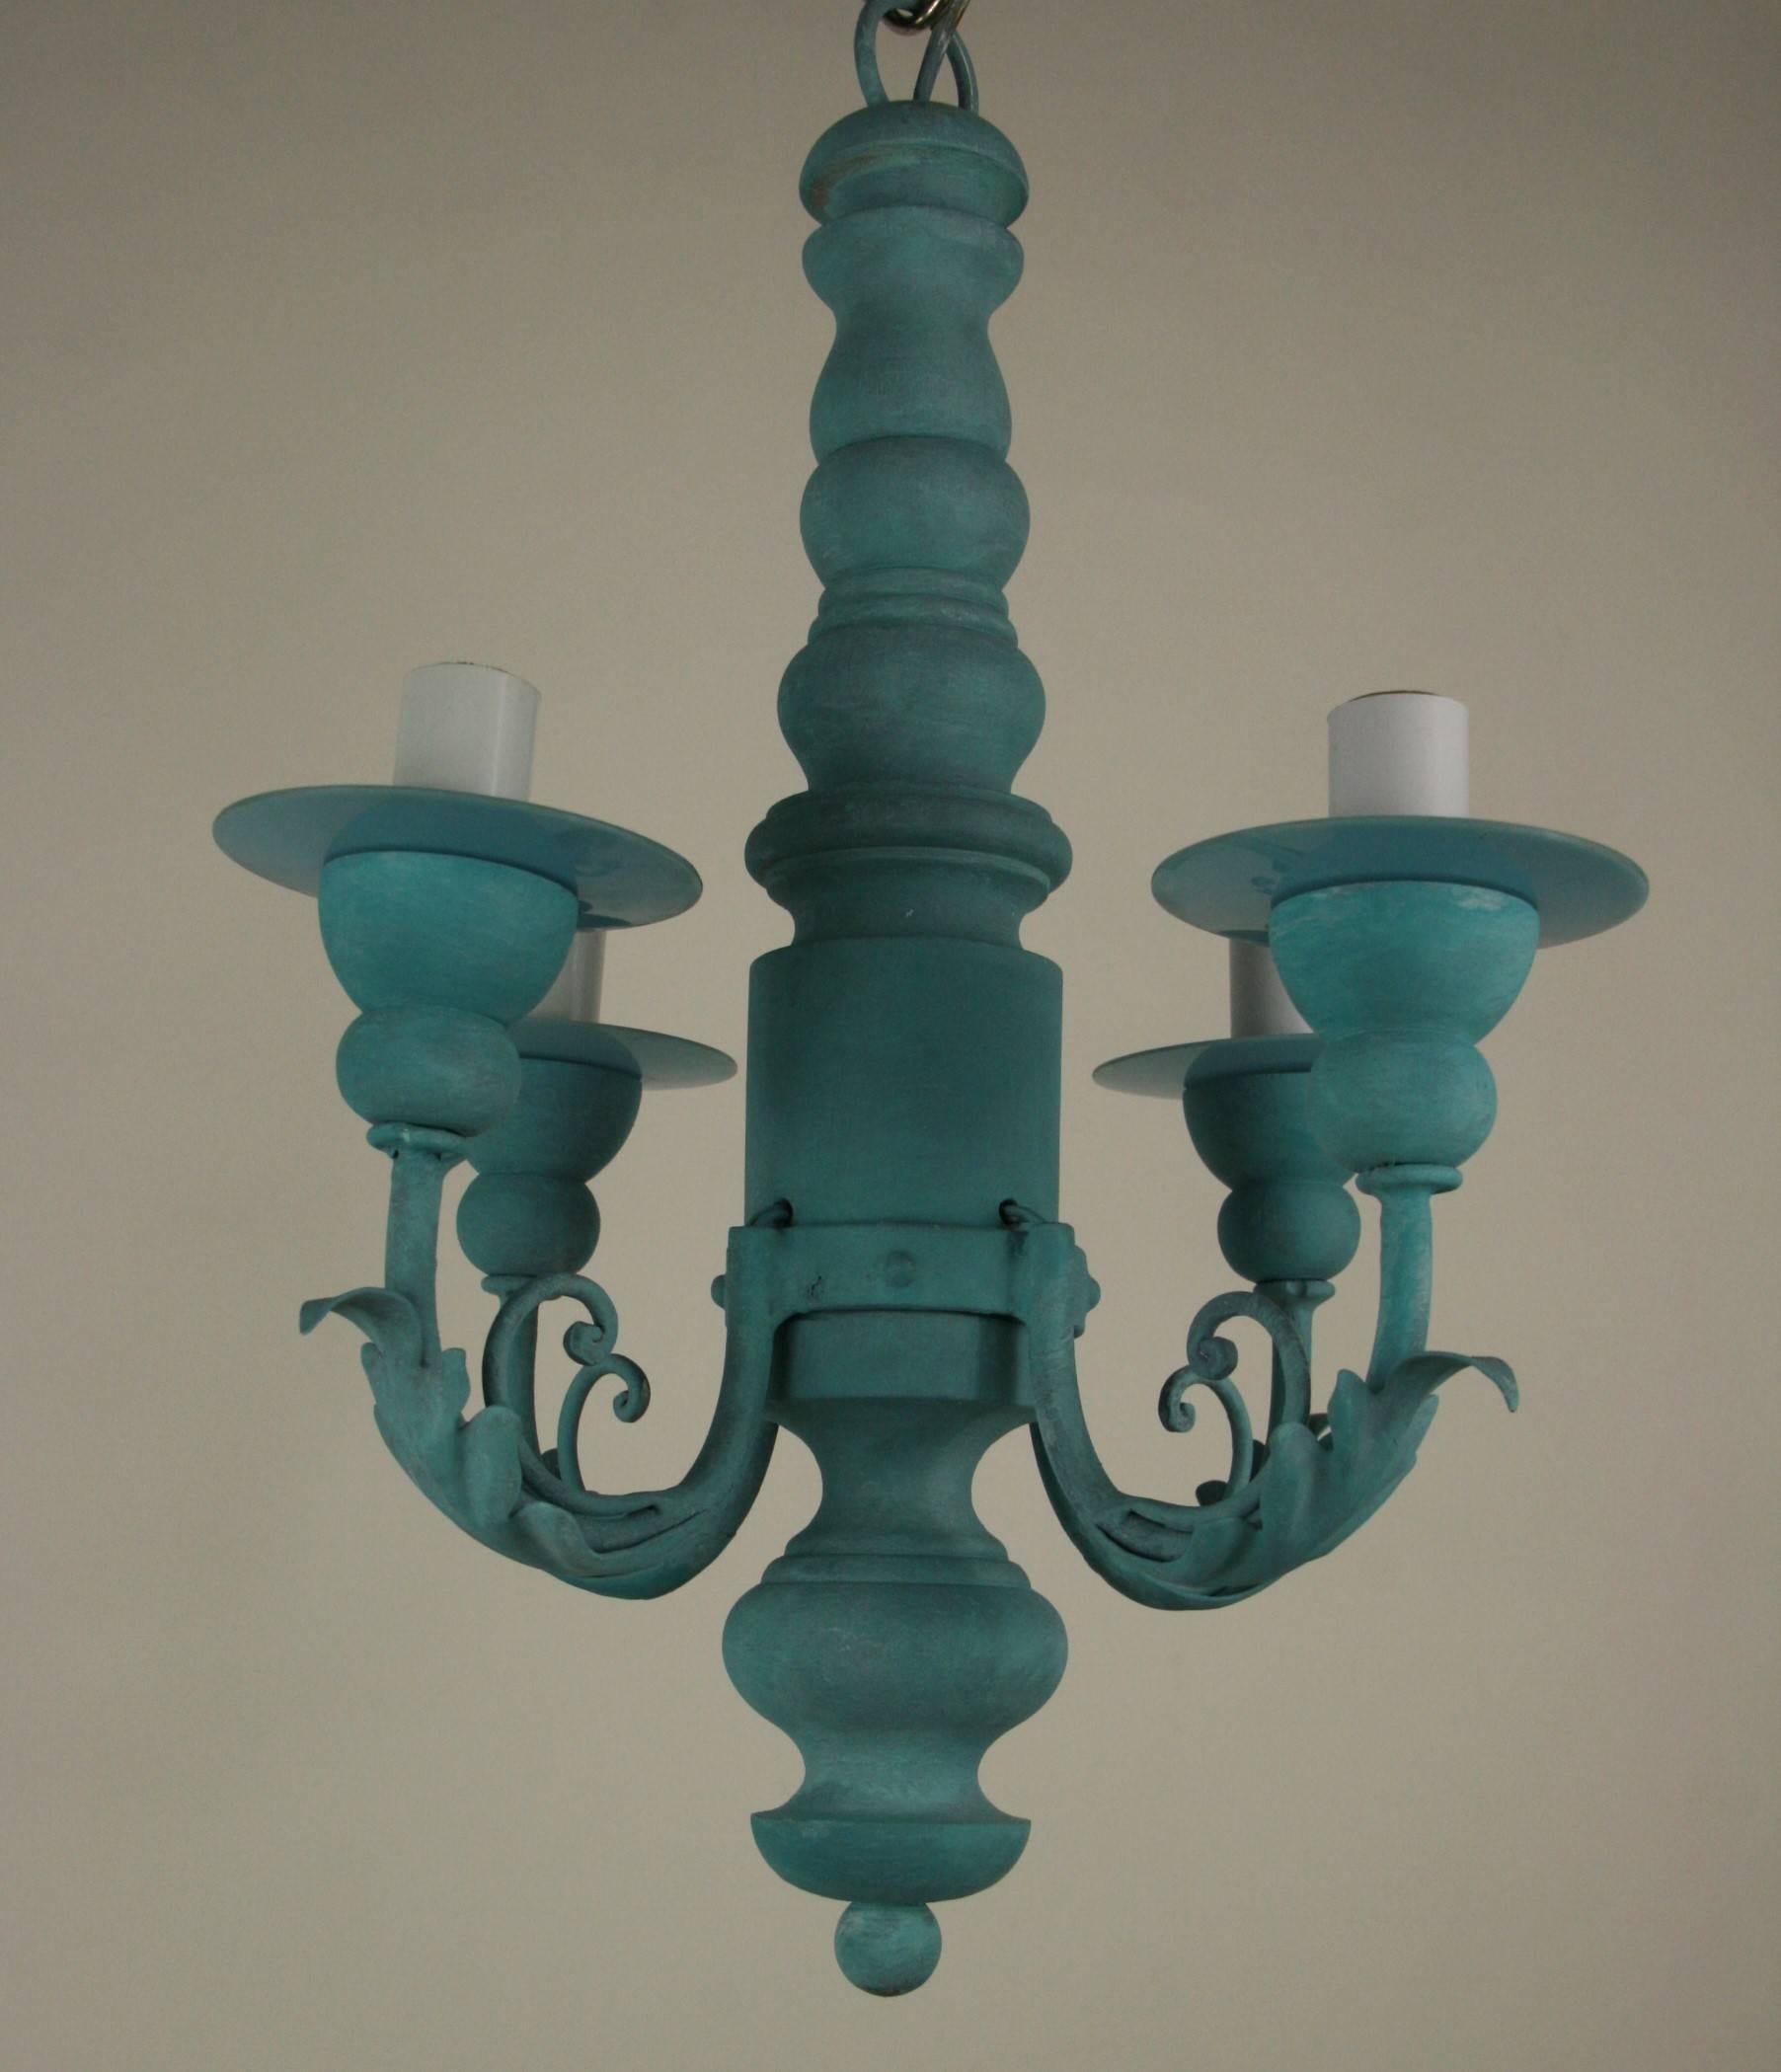 #1-2990, a hand-painted blue wood chandelier featuring four foliate arms ending with blue glass bobeches.
Newly rewired
Takes 4  60 watt max candelabra based bulbs